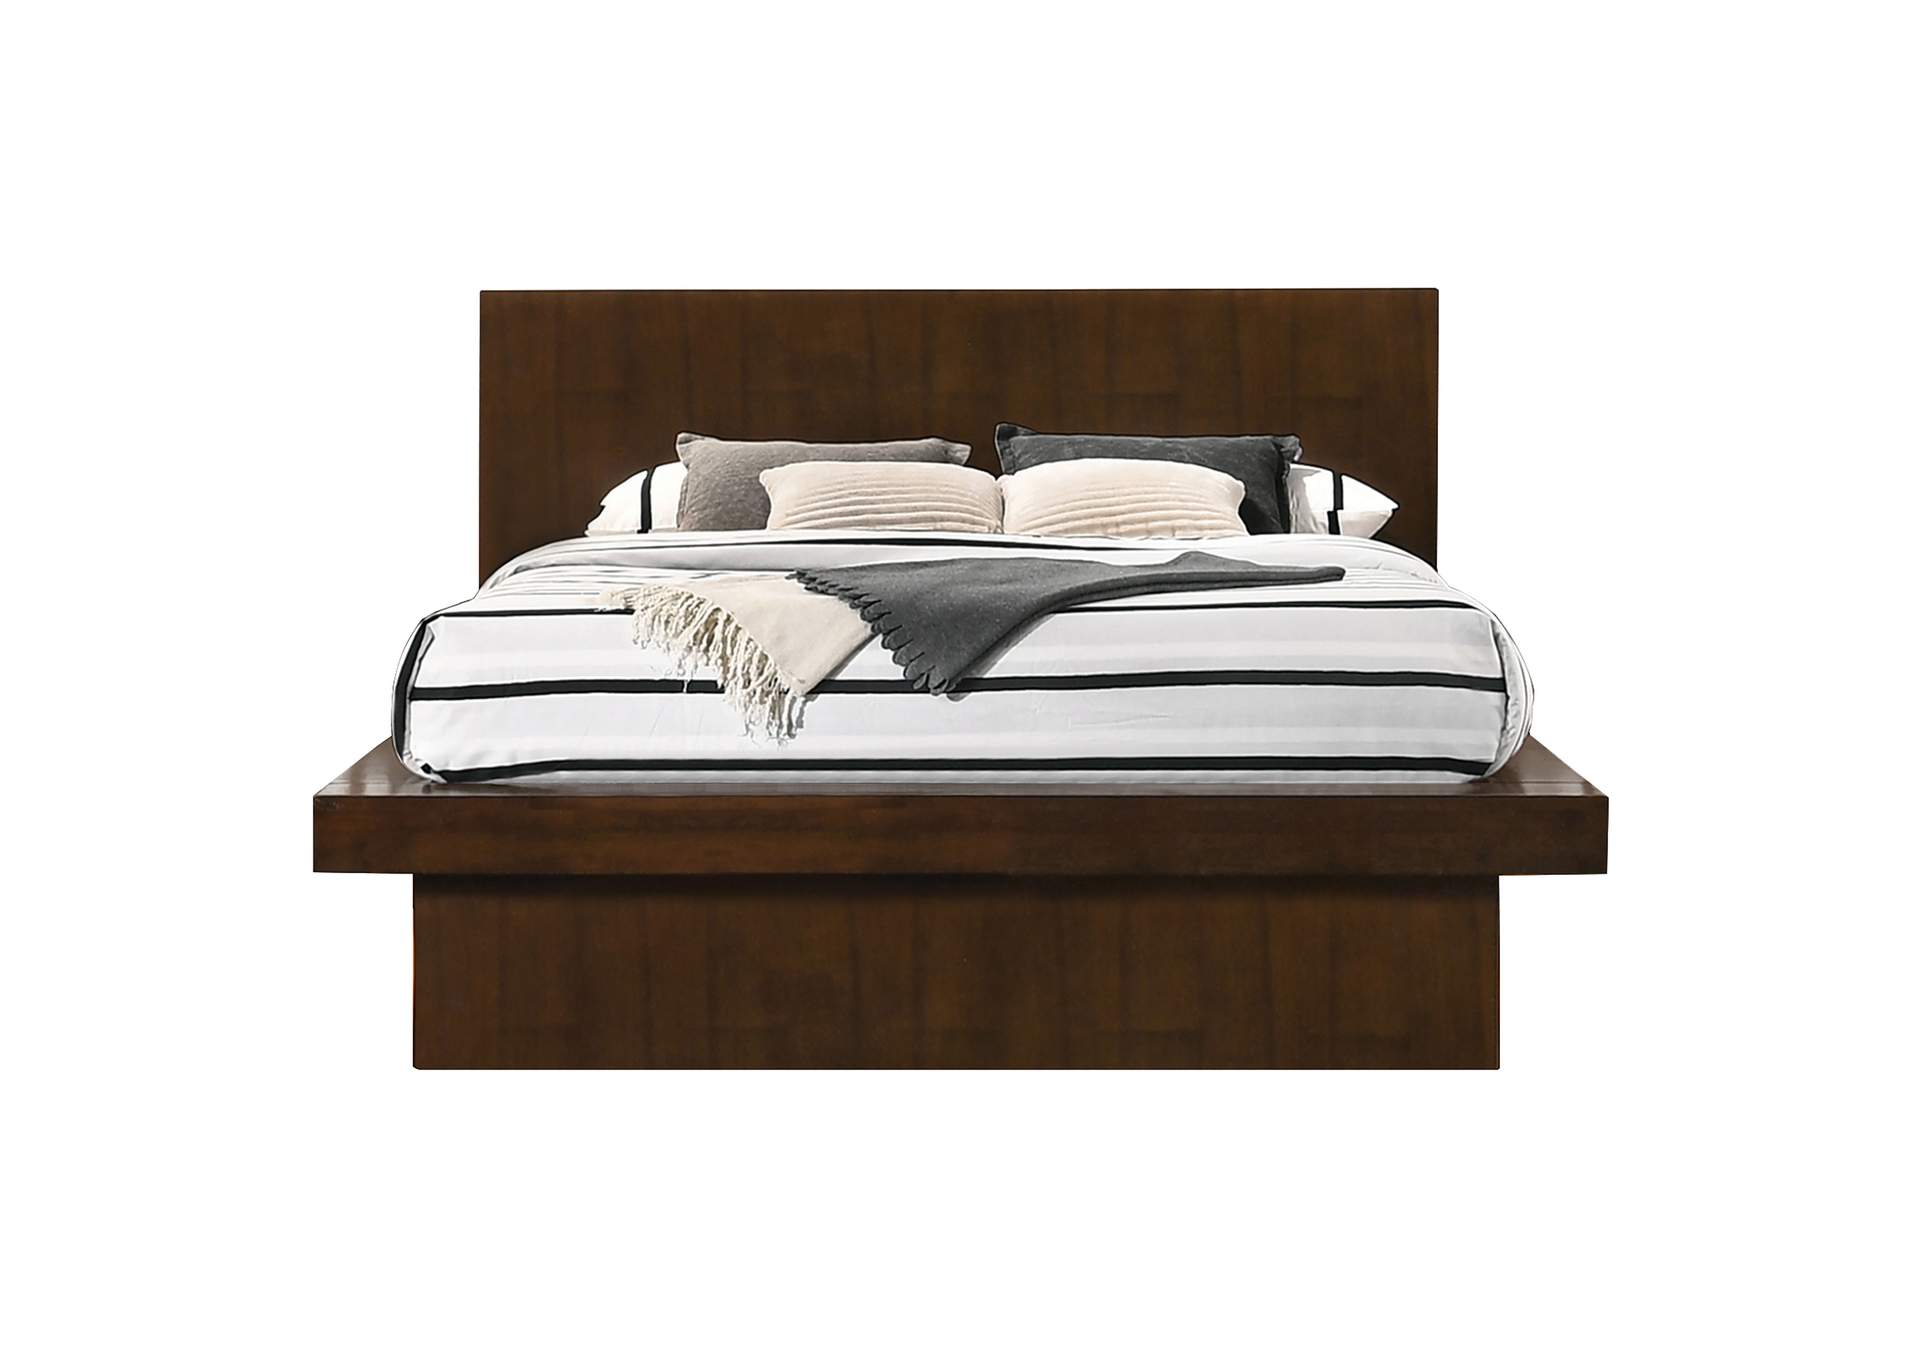 Jessica California King Platform Bed with Rail Seating Cappuccino,Coaster Furniture